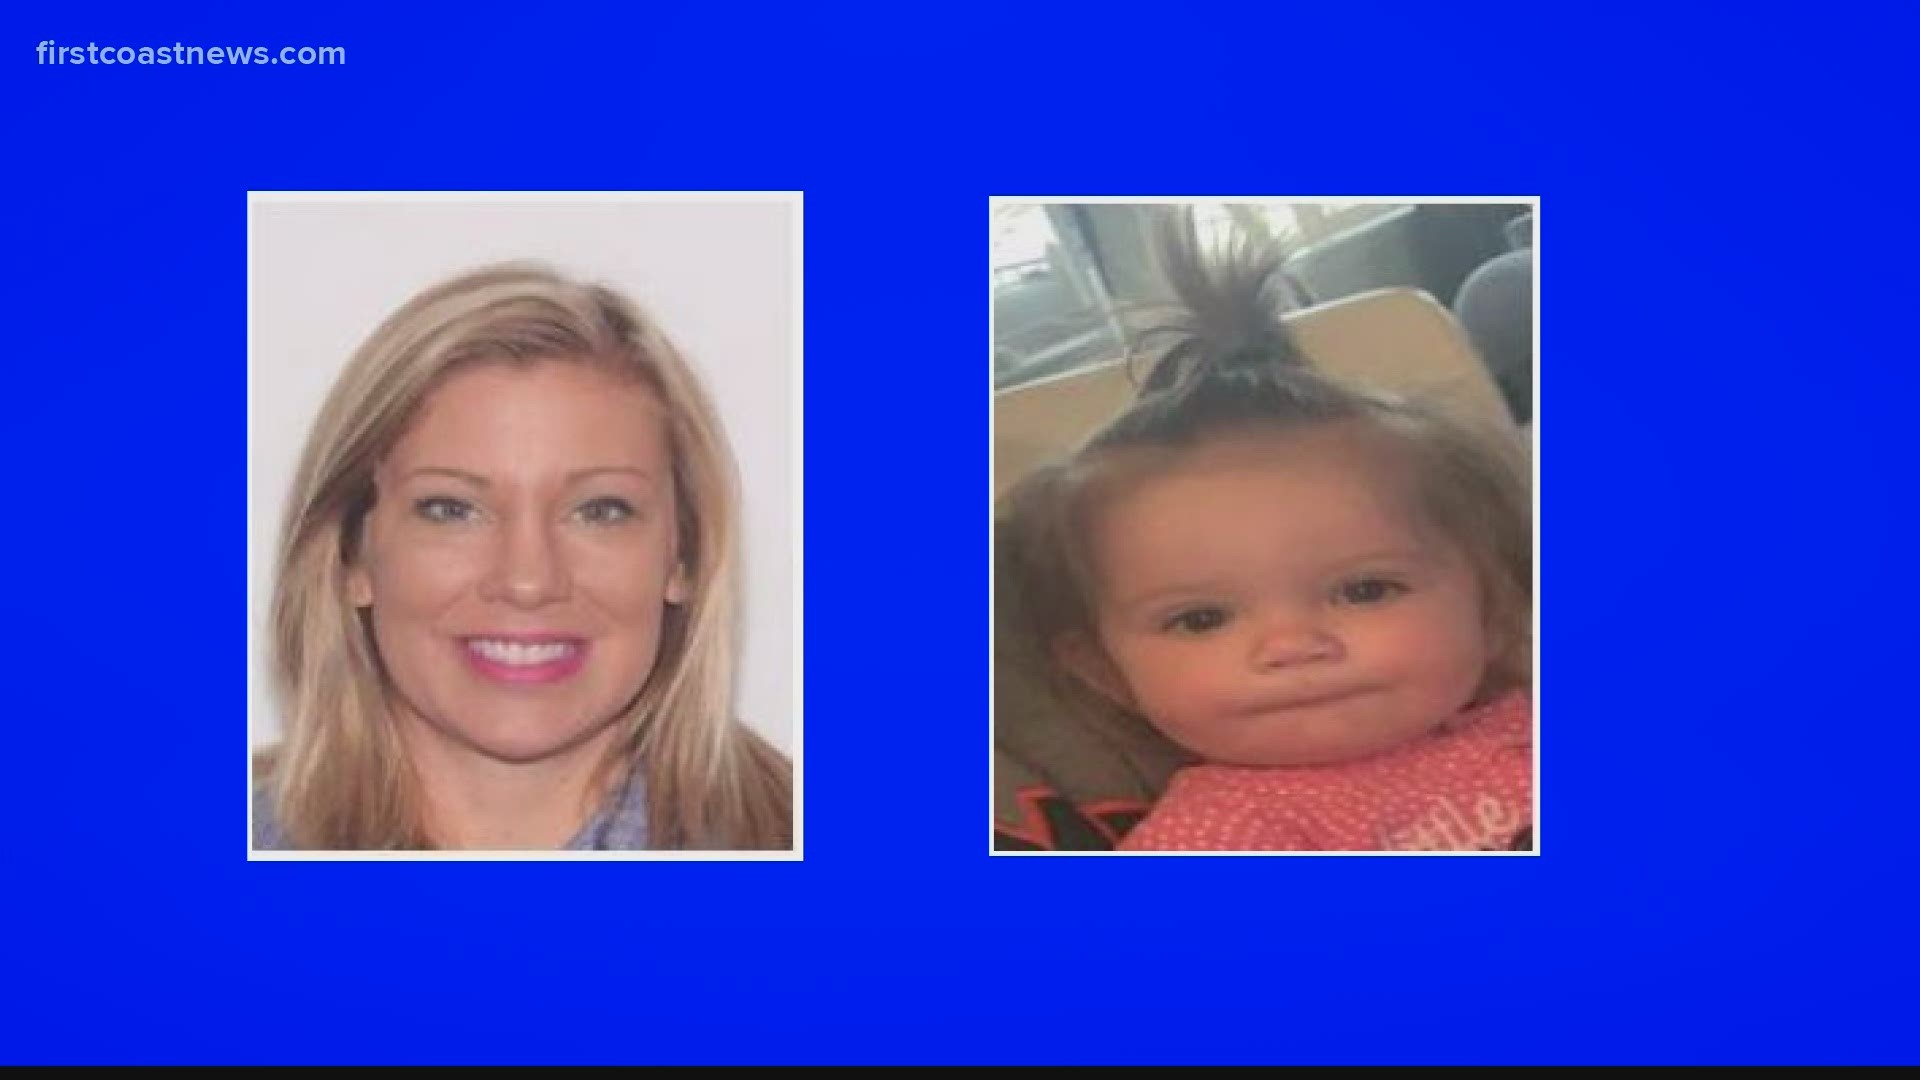 Florida Missing Child Alert issued for 1-year-old girl